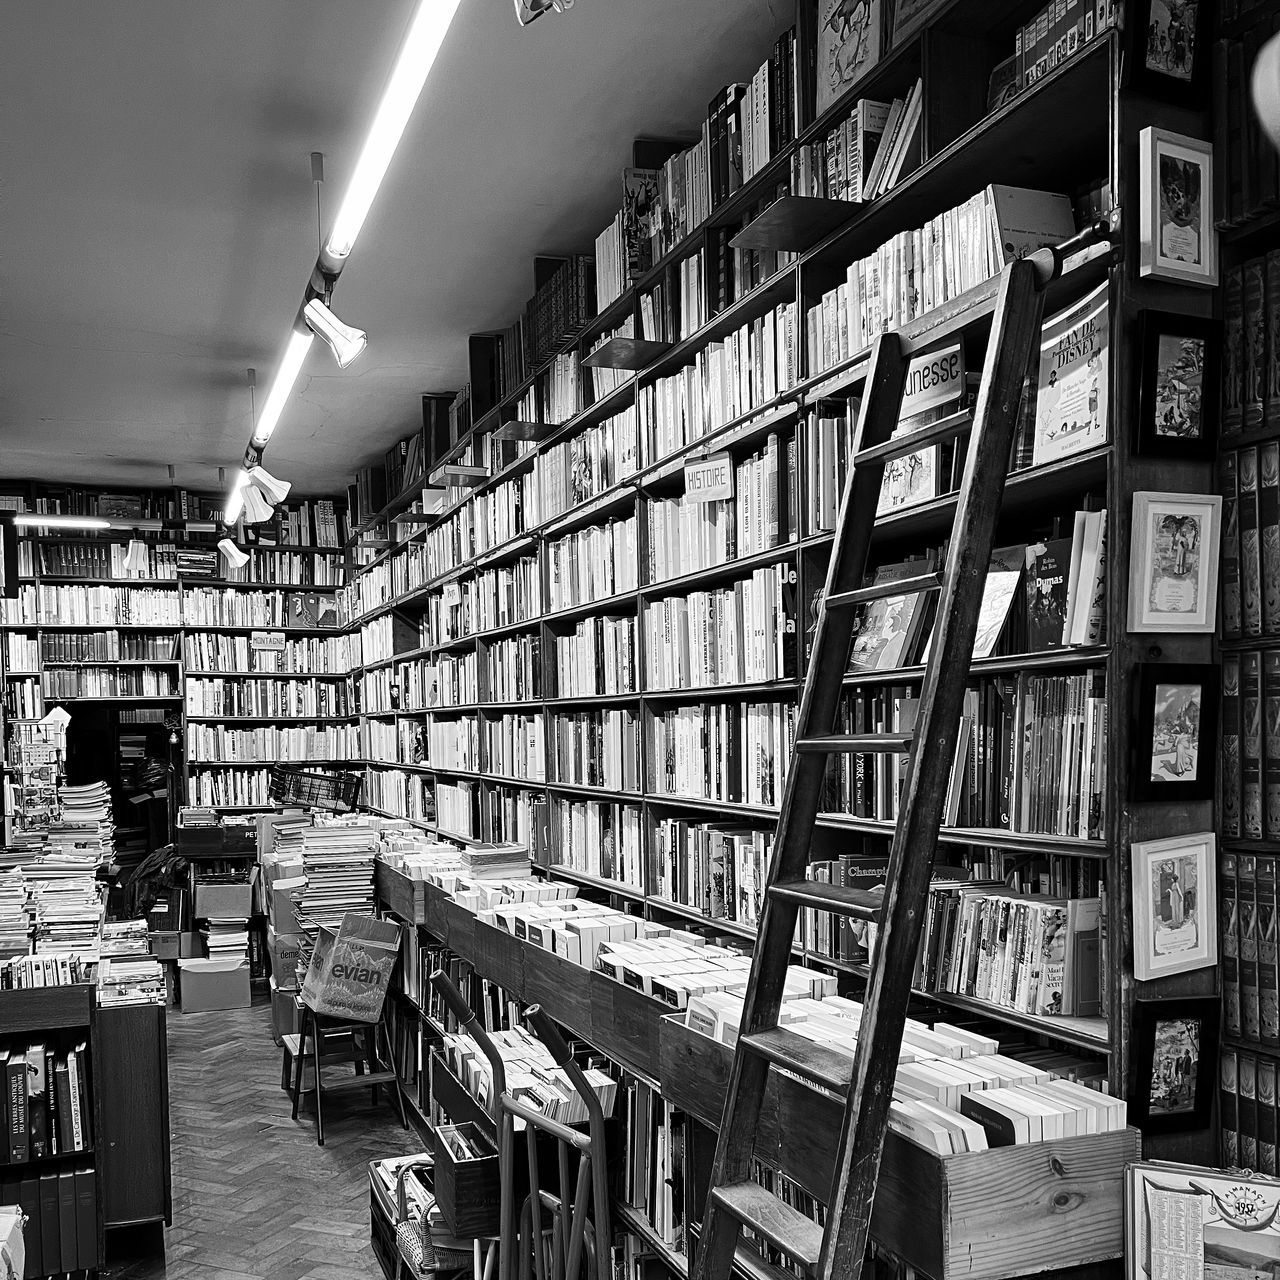 shelf, book, large group of objects, indoors, black and white, publication, education, library, bookshelf, monochrome, building, monochrome photography, bookcase, in a row, order, abundance, furniture, learning, archive, no people, arrangement, architecture, literature